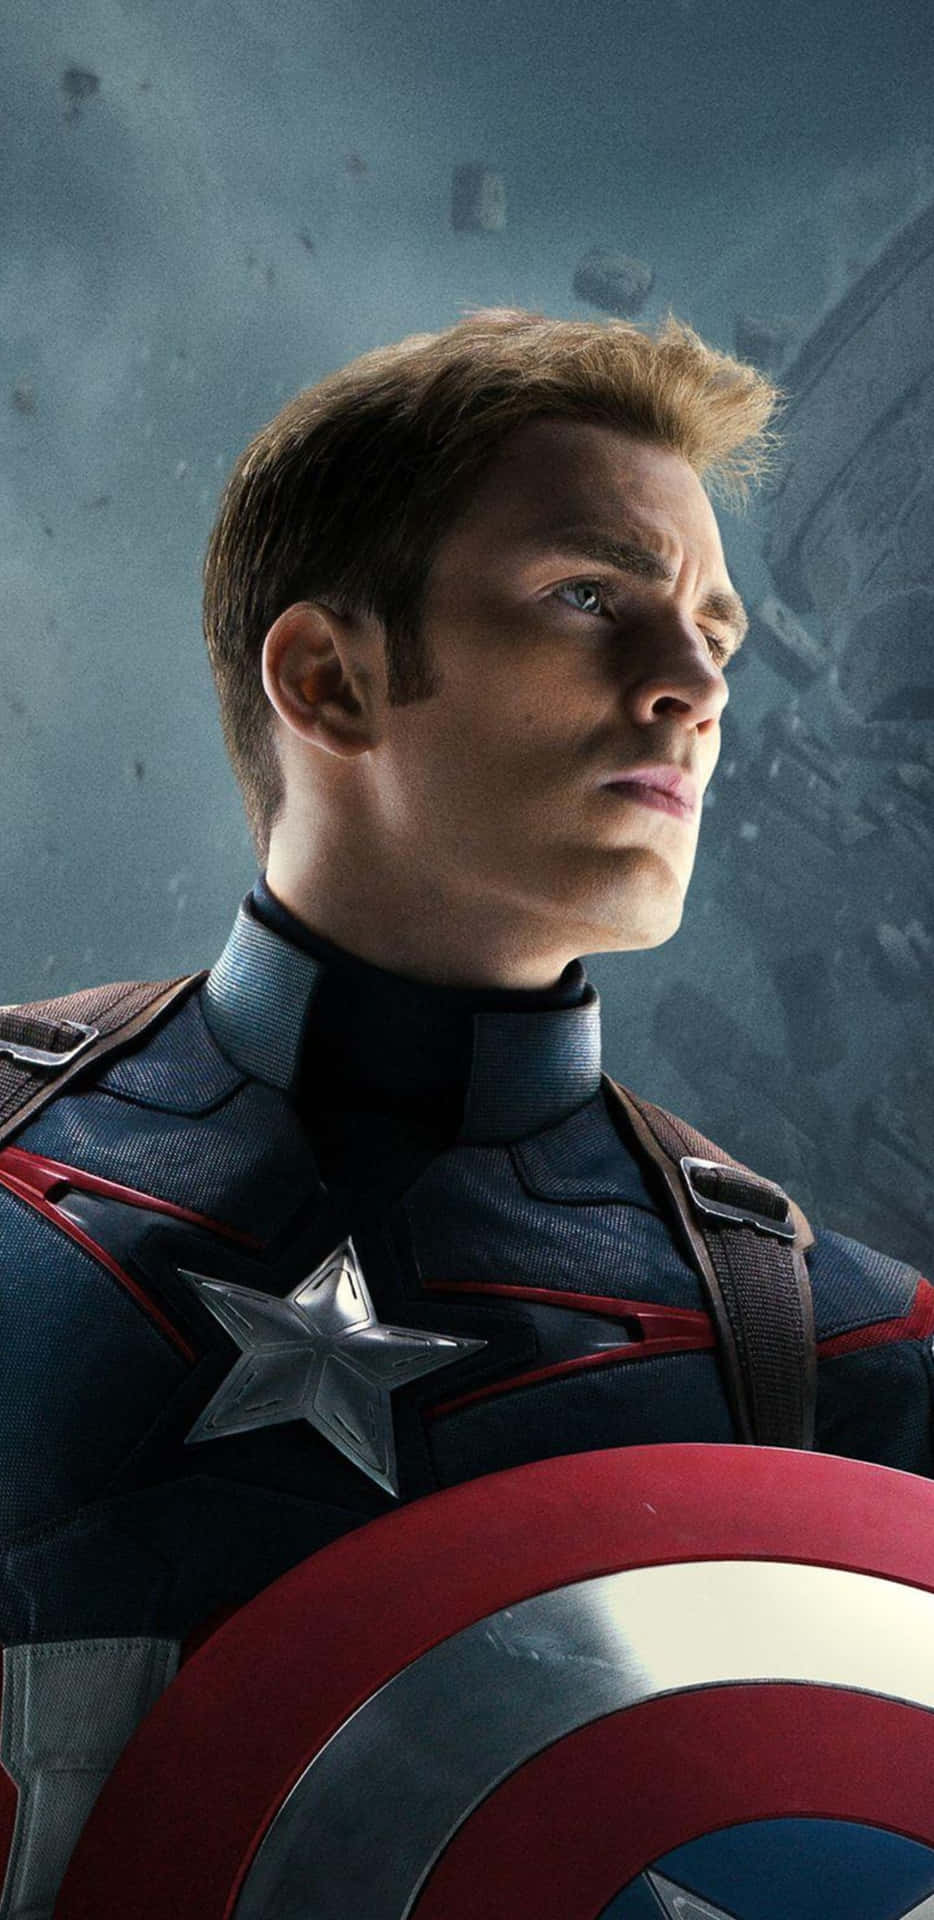 Pixel 3xl Captain America baggrund fra Avengers Age Of Ultron